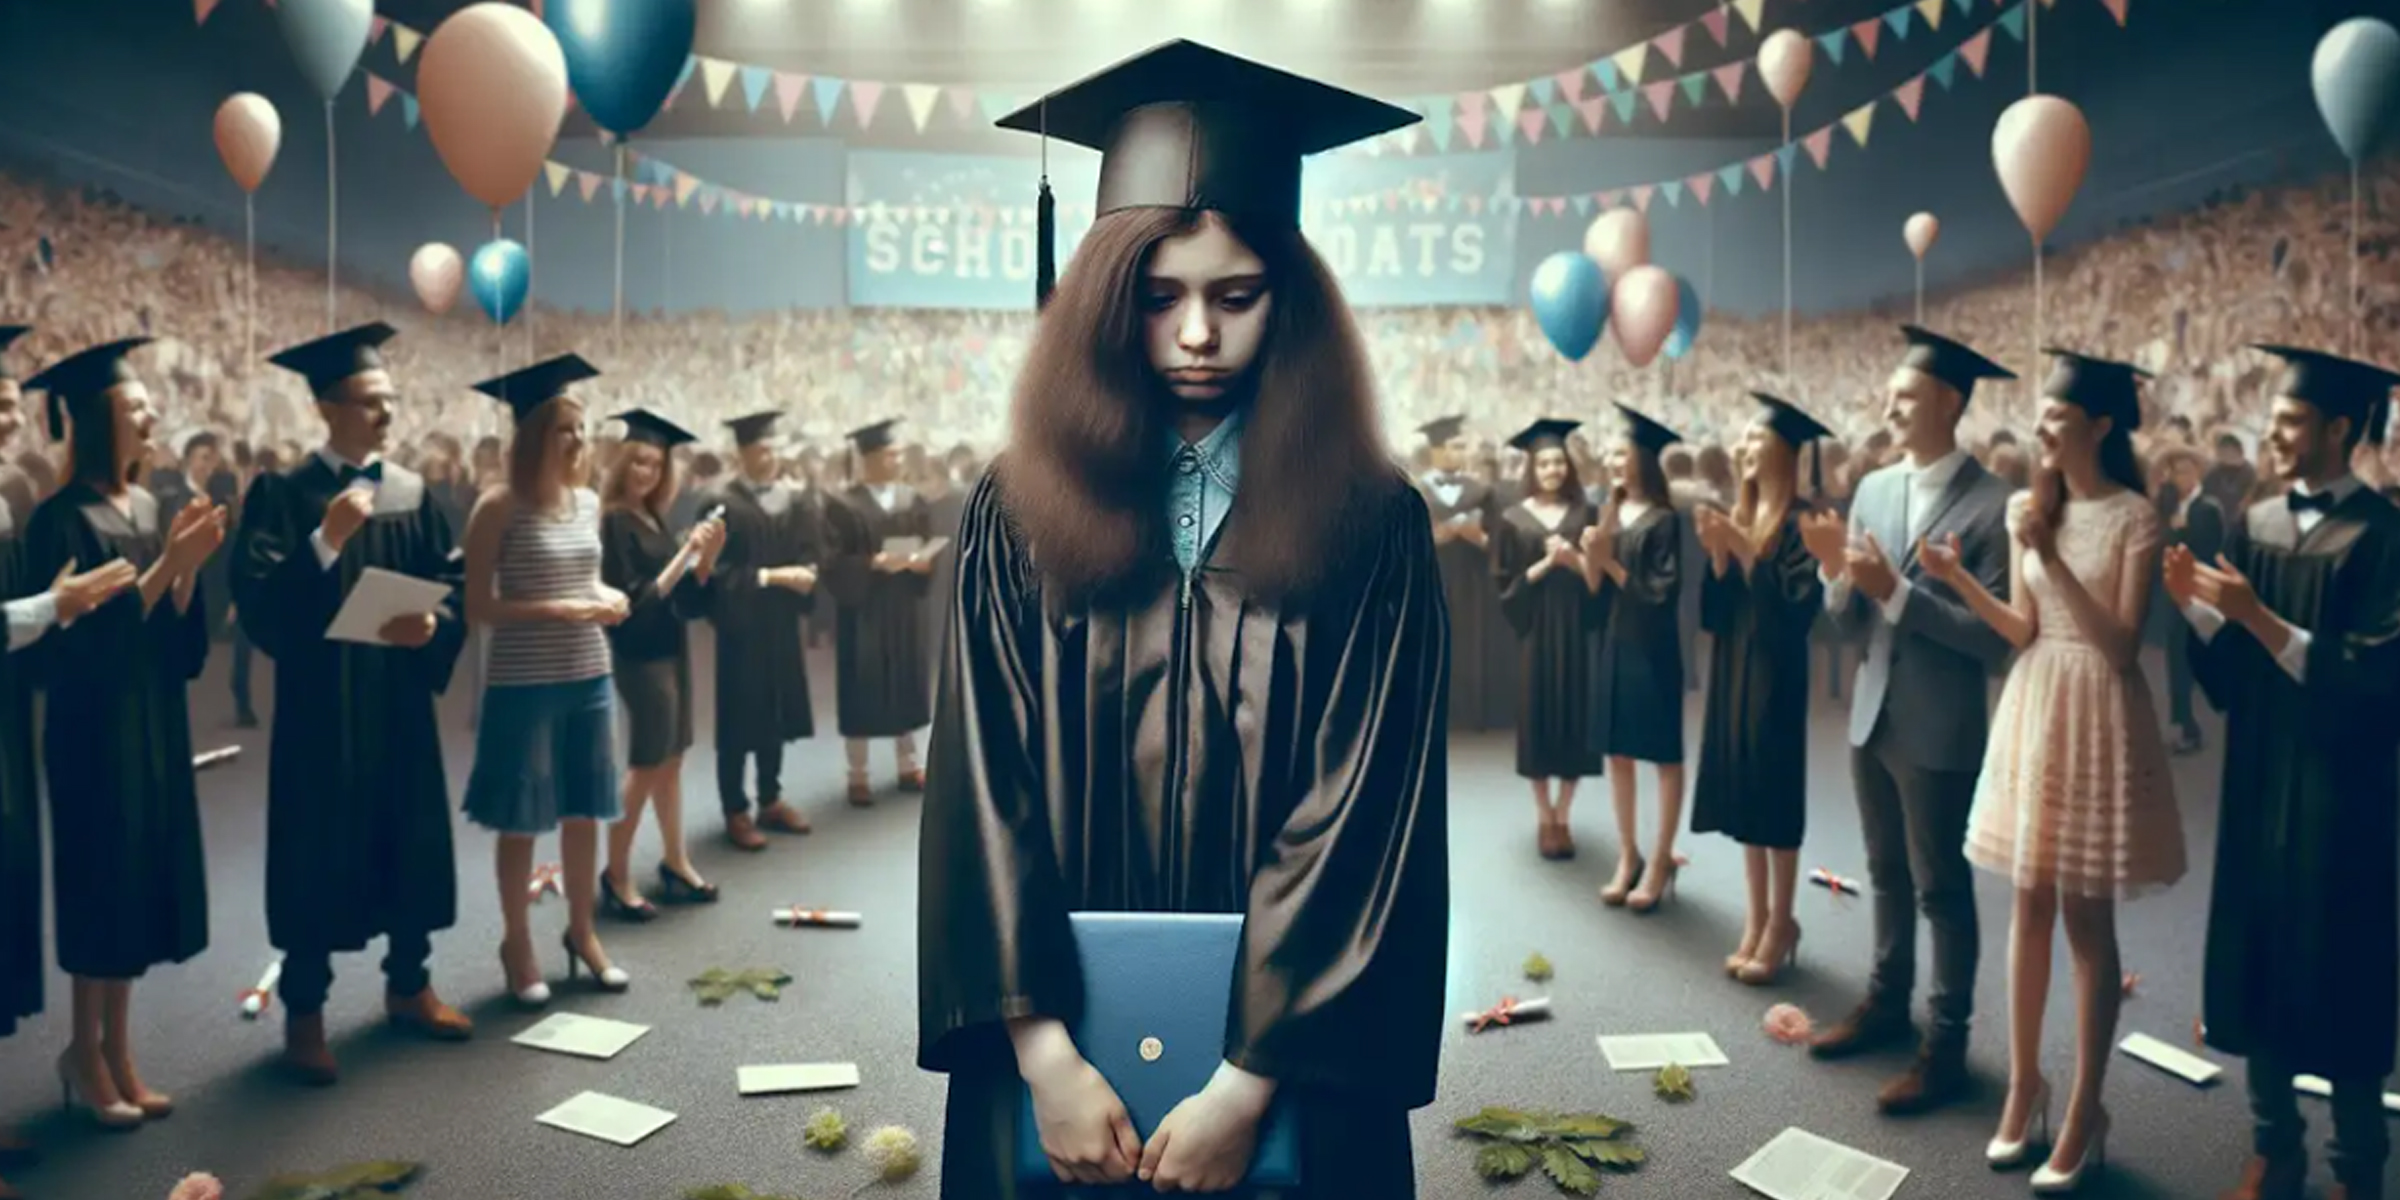 A young woman feeling sad on her graduation day with people cheering in the background | Source: Amomama